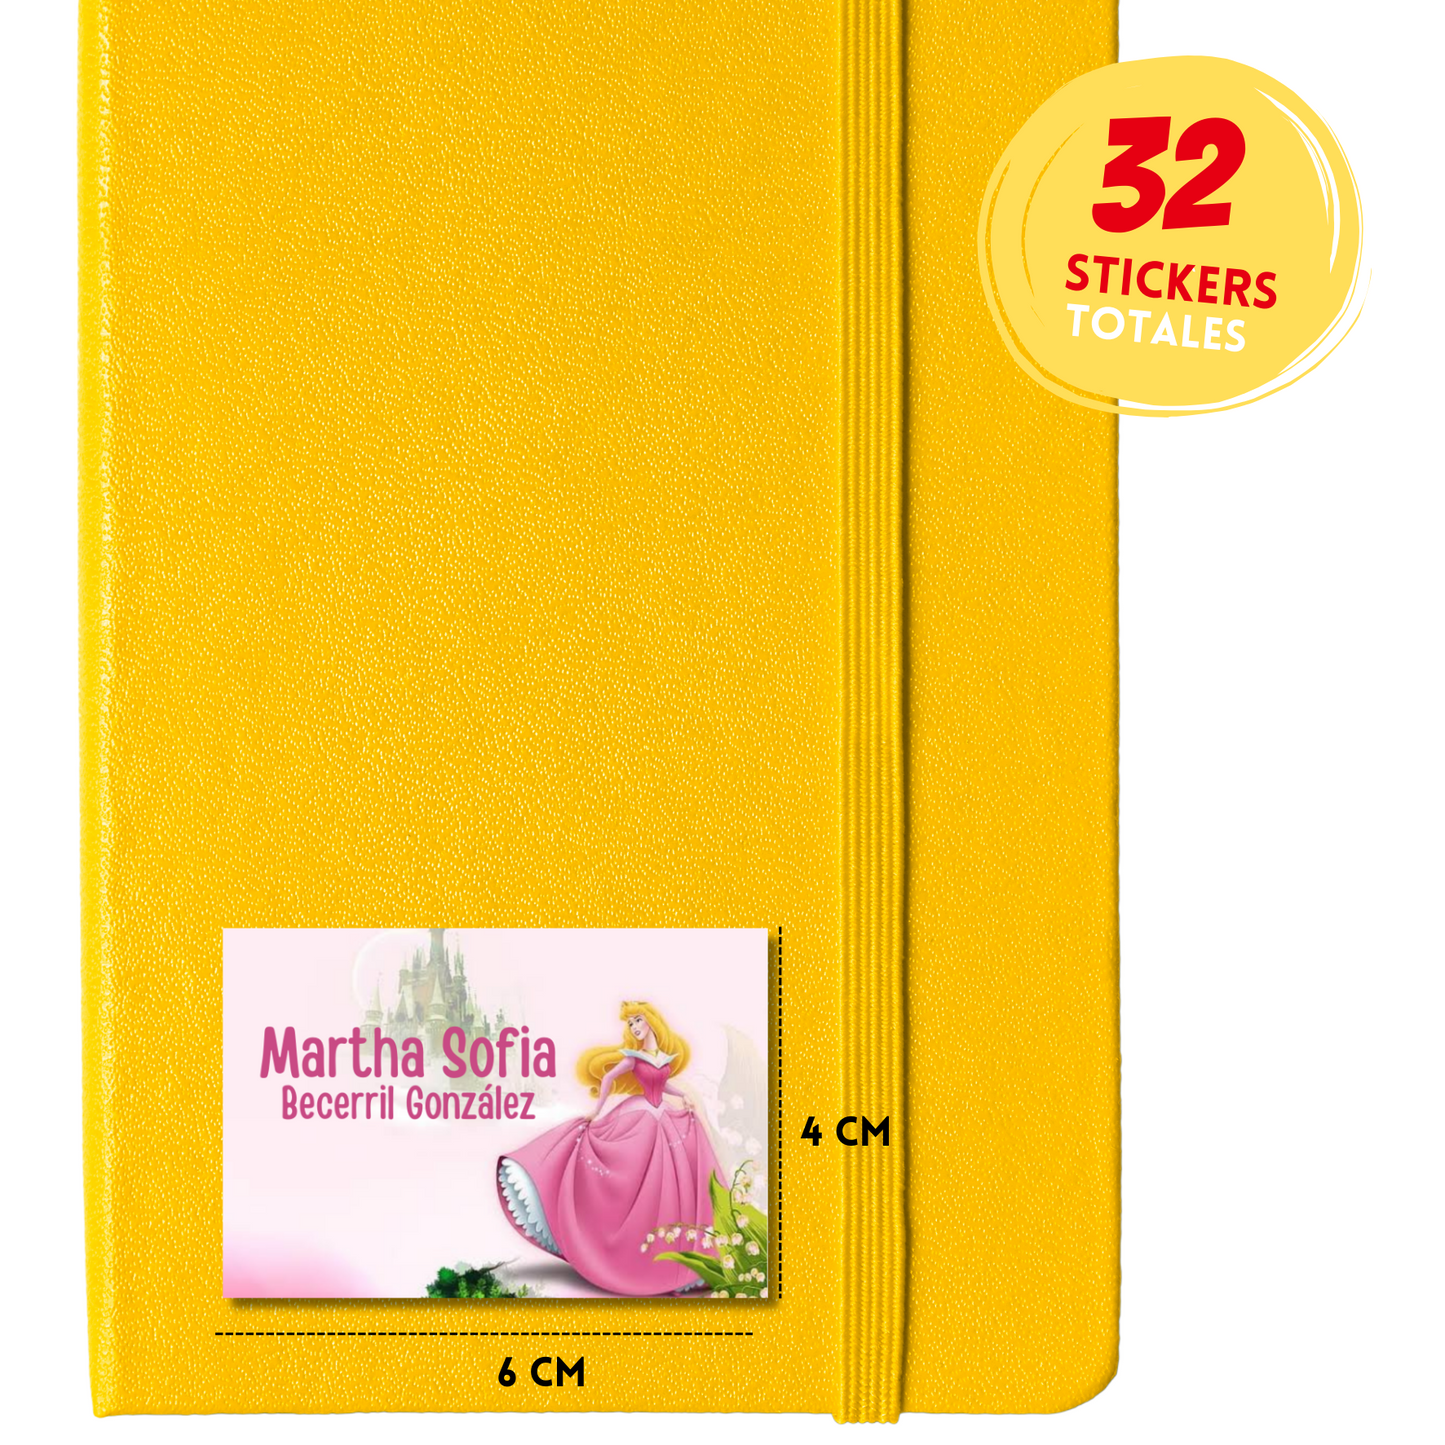 Sleeping Beauty Aurora Castle Personalized School Labels Notebooks, Books and Pencils 